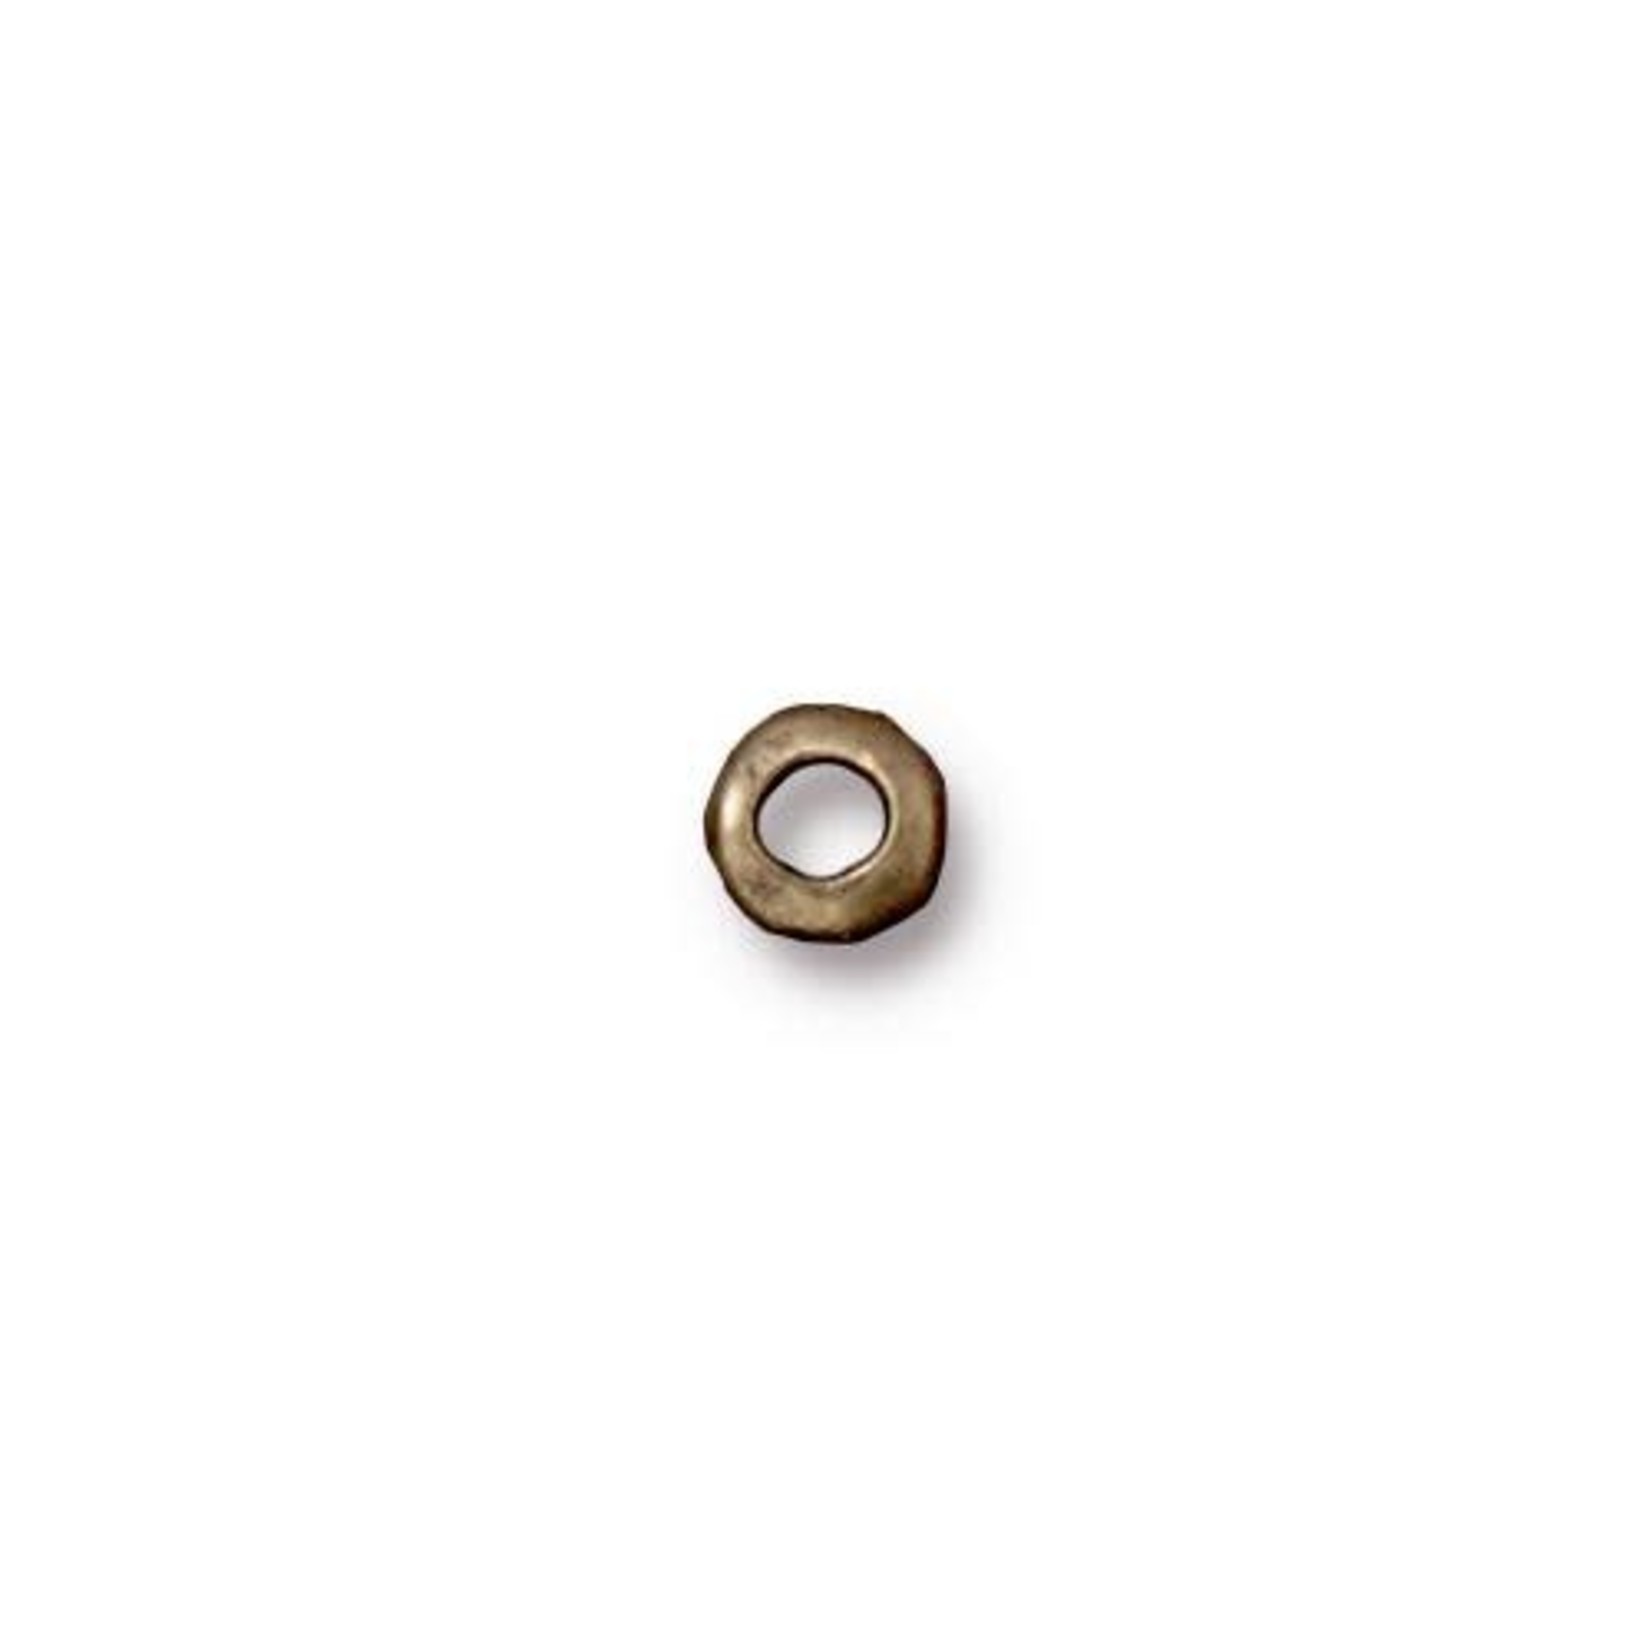 Tierracast Brass Oxide Plated 5mm Nugget Large Hole Spacer Bead - 10 pieces